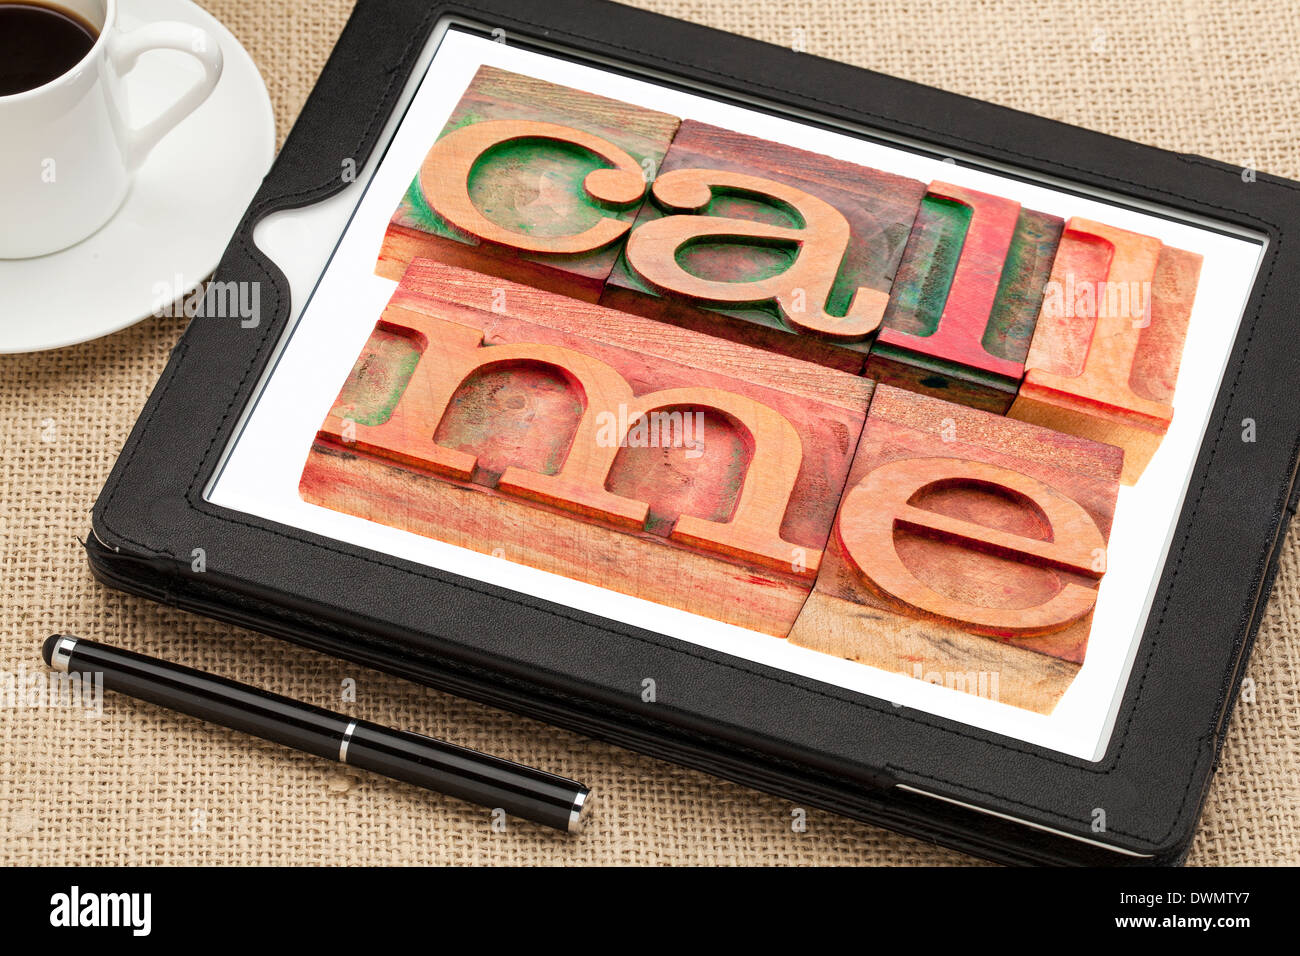 call me request or reminder - words in vintage wooden letterpress printing blocks on a digital tablet with a cup of coffee Stock Photo